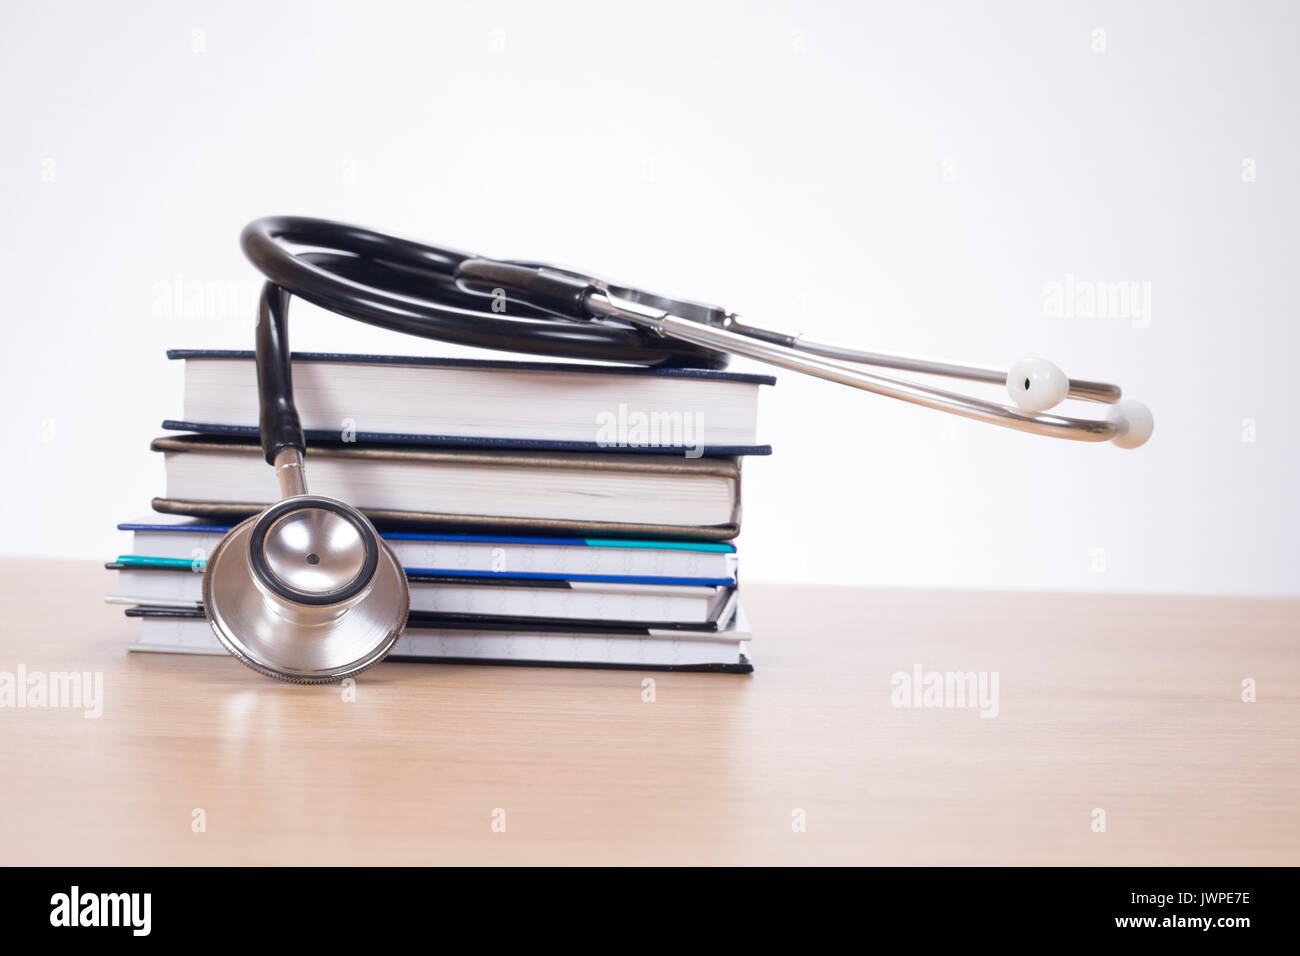 Acoustic stethoscope on pile of planners lying on desk Stock Photo